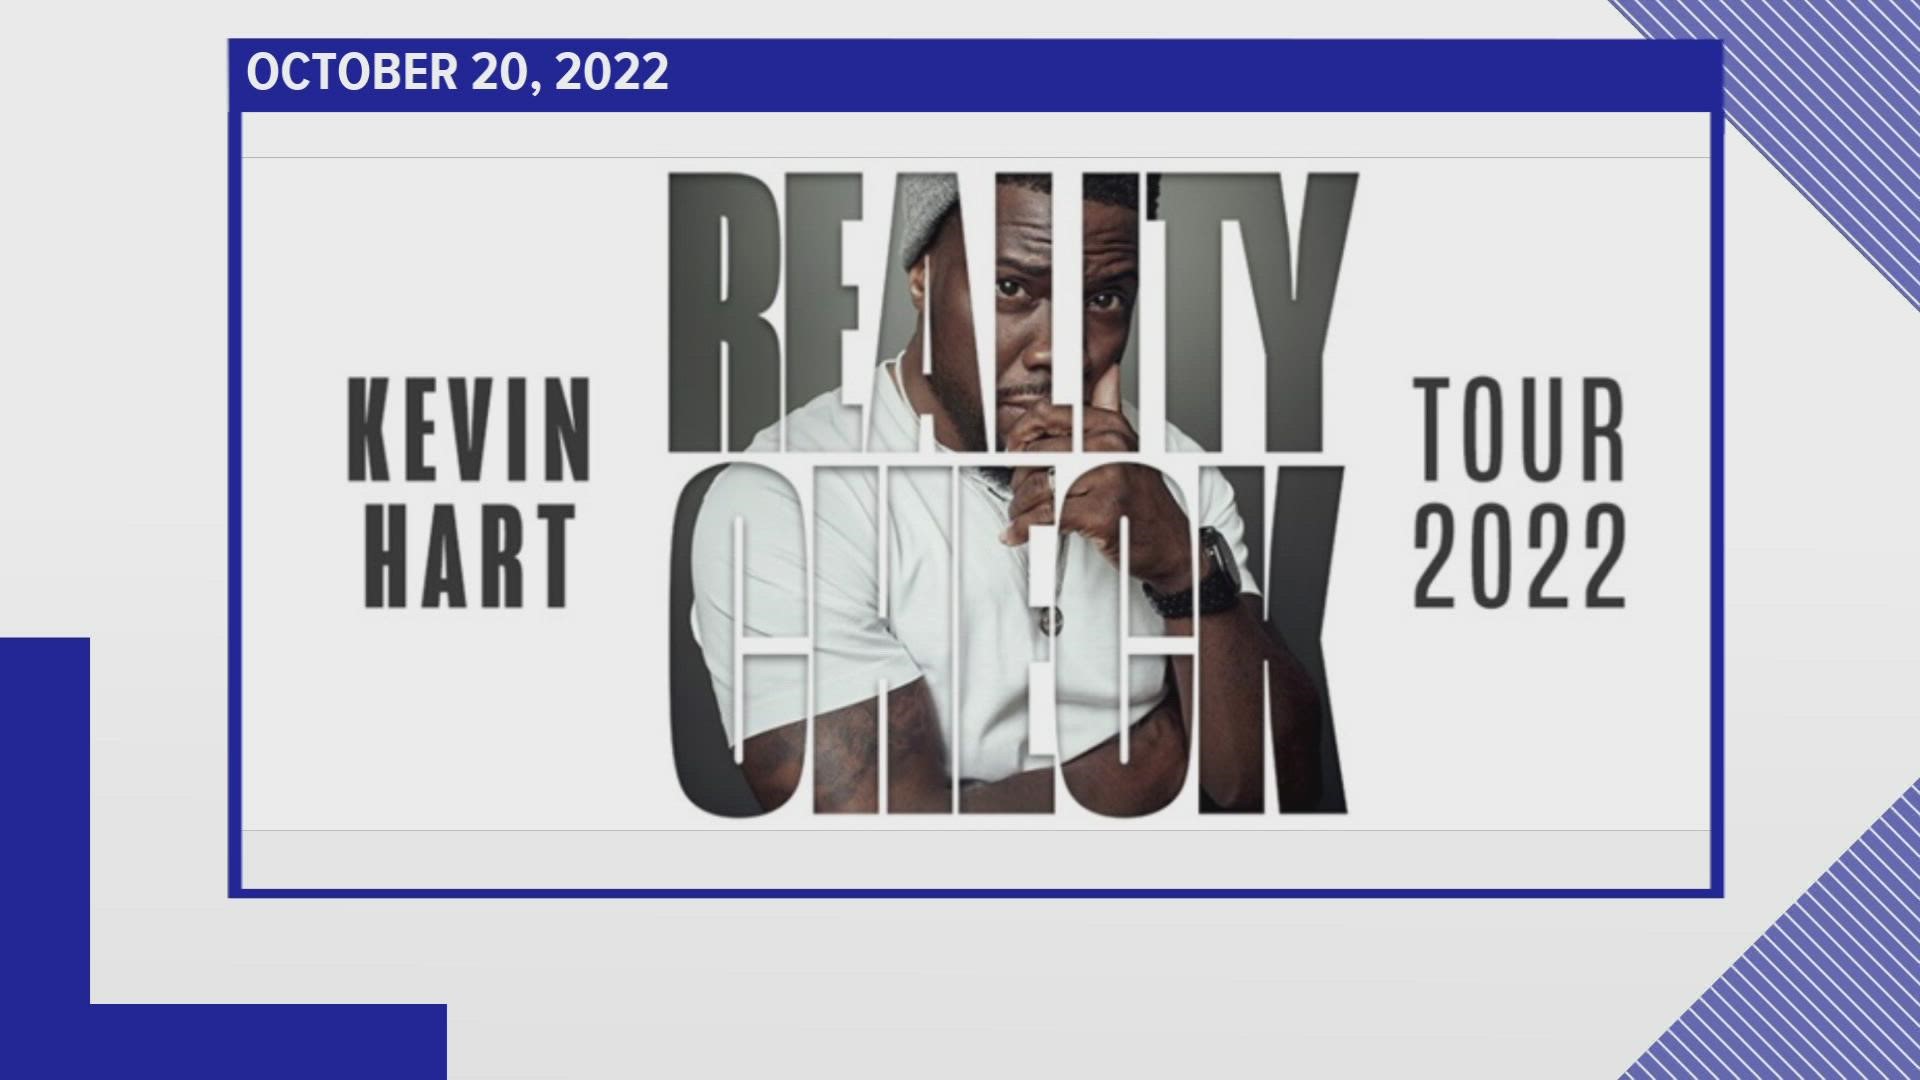 Hart's 2022 Reality Check Tour will stop in Knoxville on October 20. Tickets go on sale Friday.